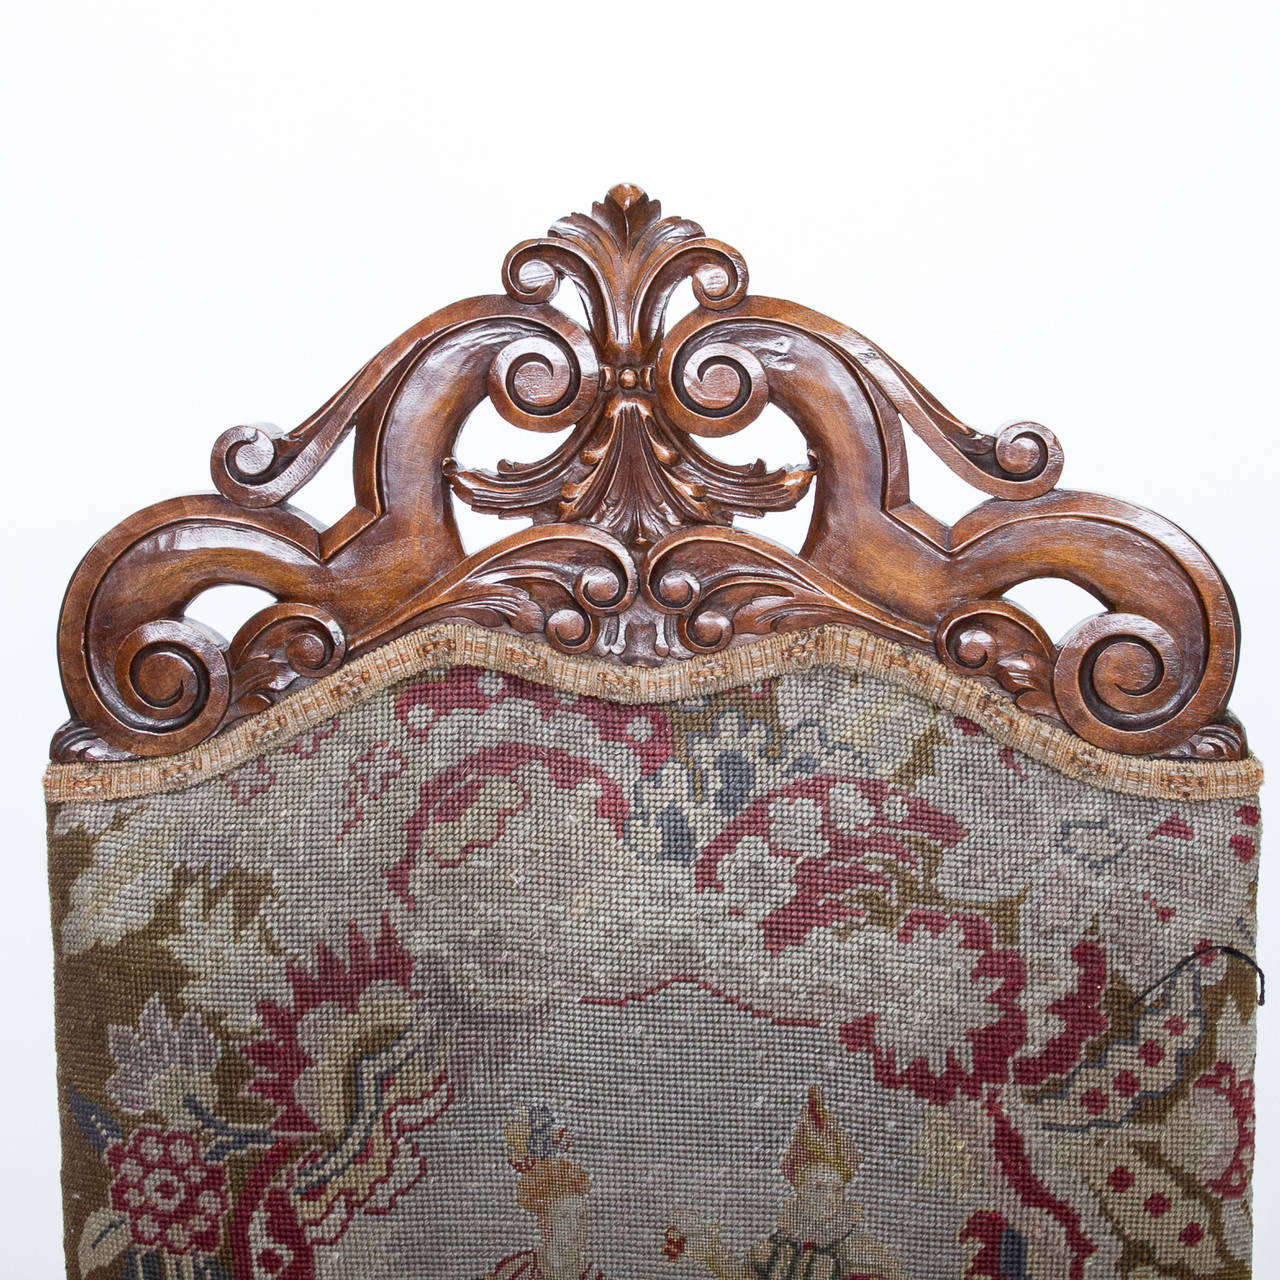 A well carved 19th century walnut framed chair of late 17th century design, turned arm supports, carved apron and turned stretcher, covered in a fine 19th century tapestry. The crest of the chair has a presentation of scroll carvings in an